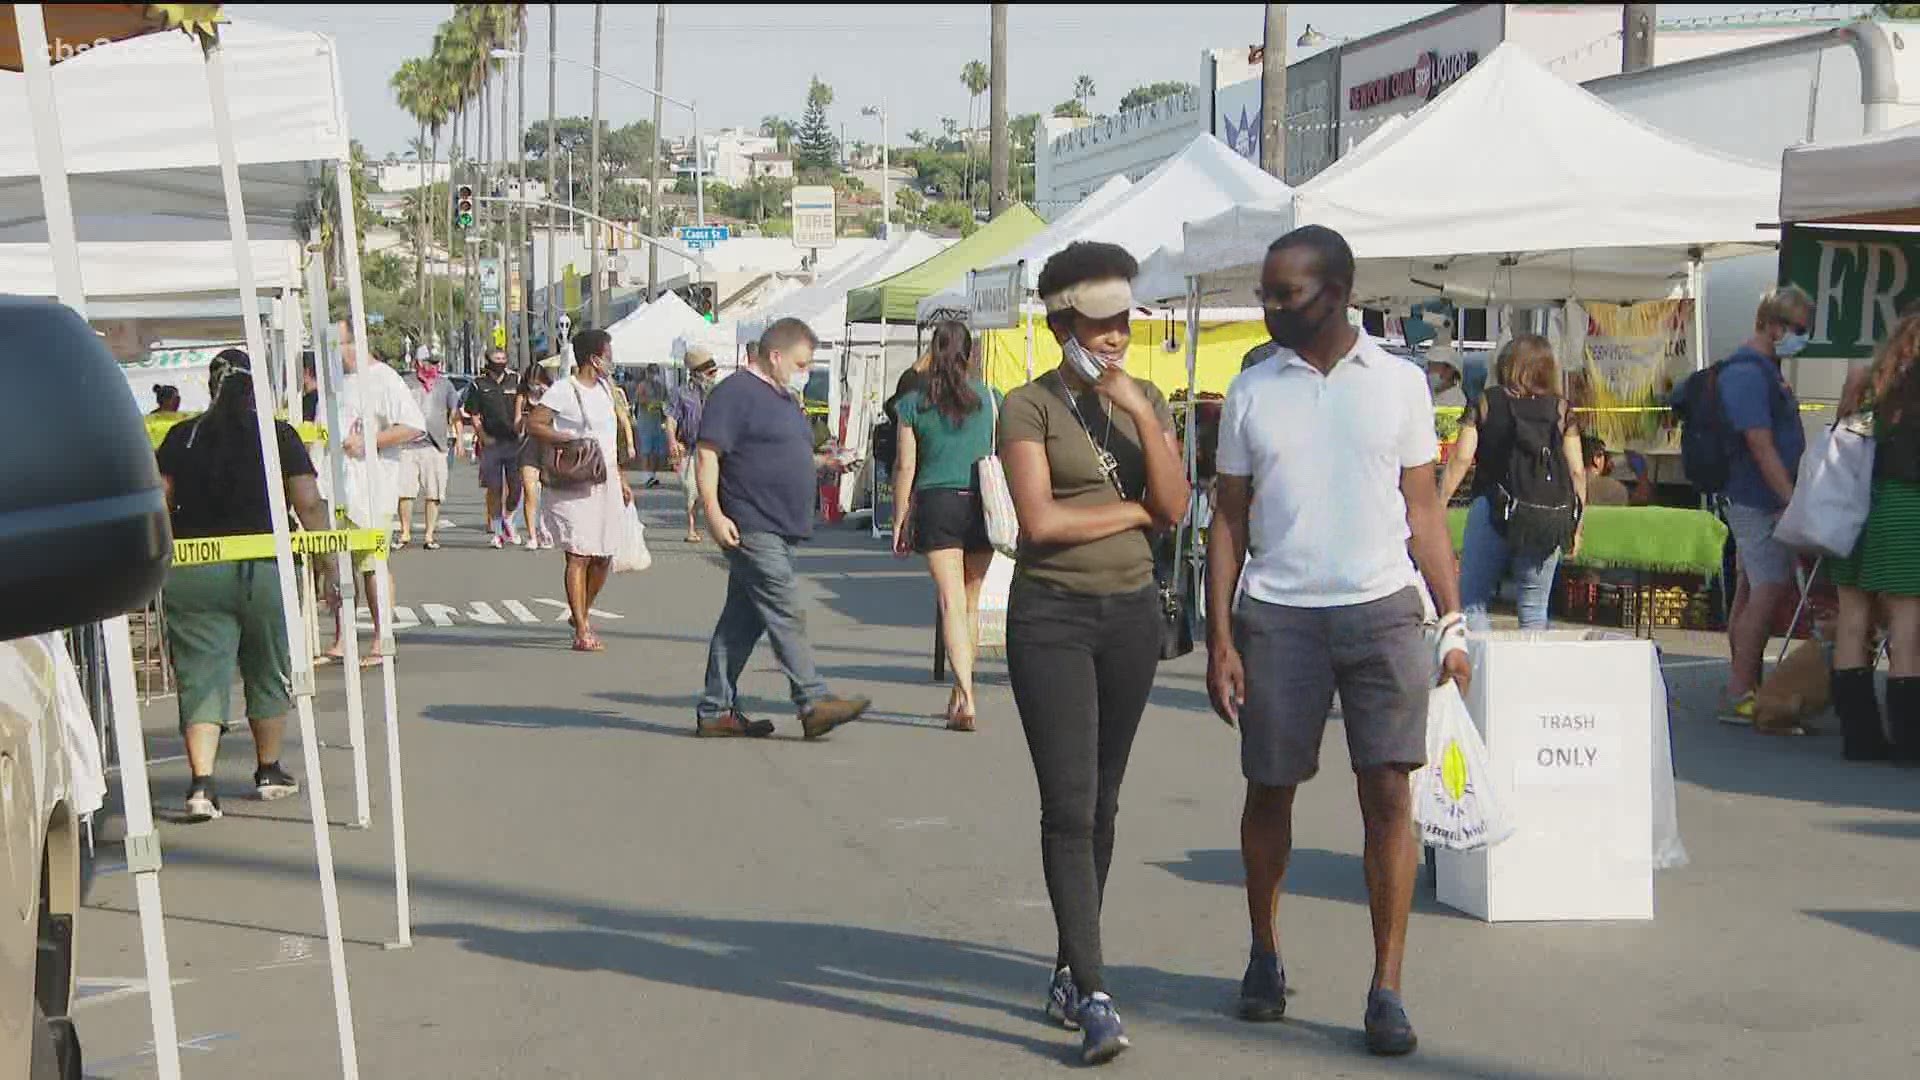 News 8's Abbie Alford walked the farmer's market to share the roots of the community.